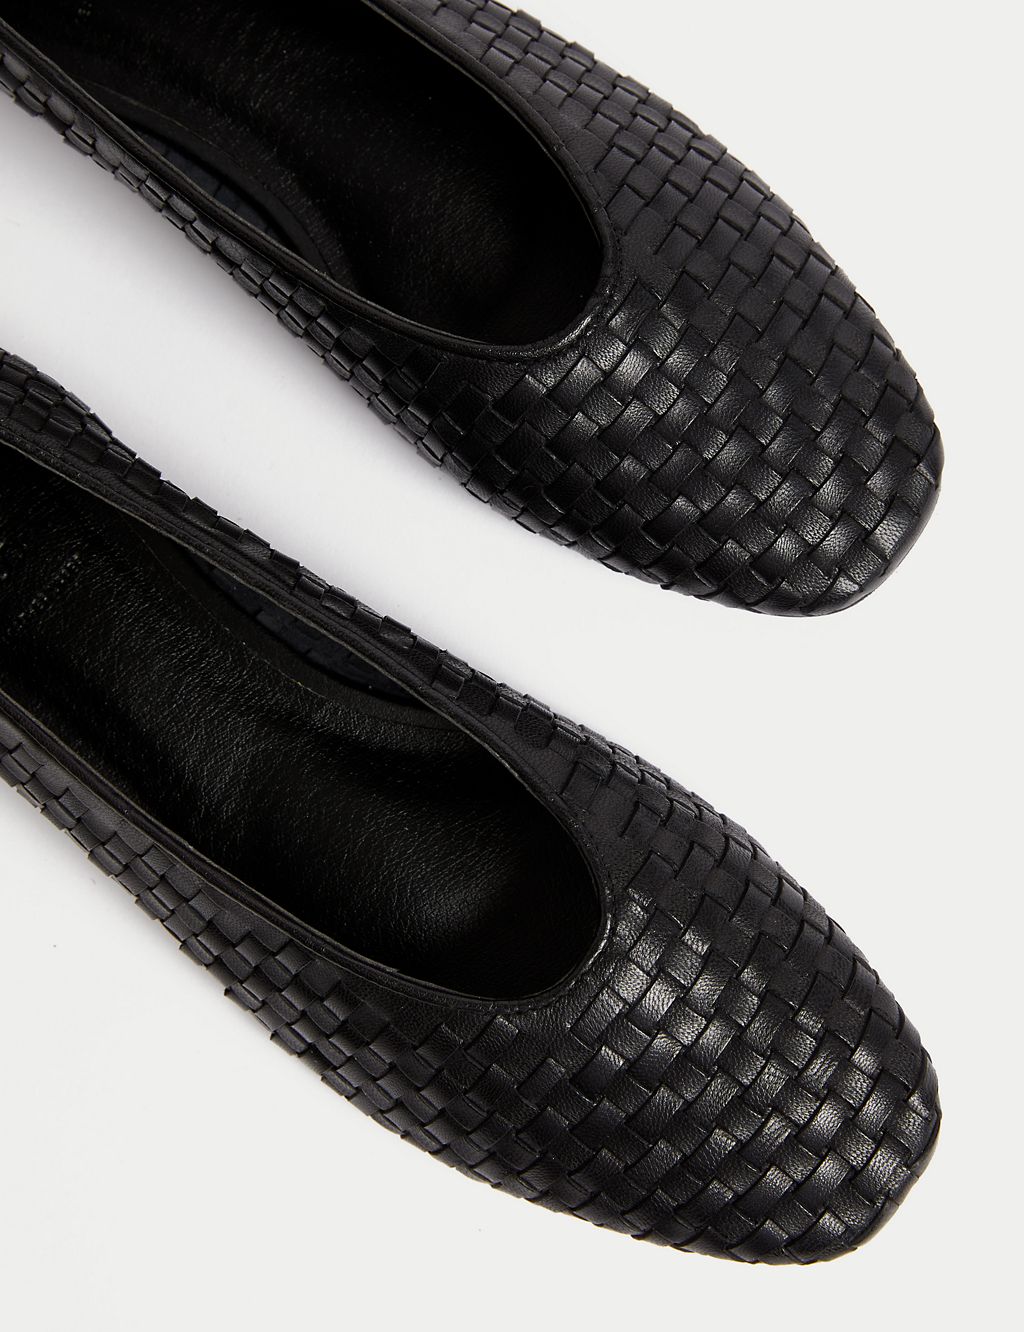 Leather Woven Flat Ballet Pumps 2 of 3